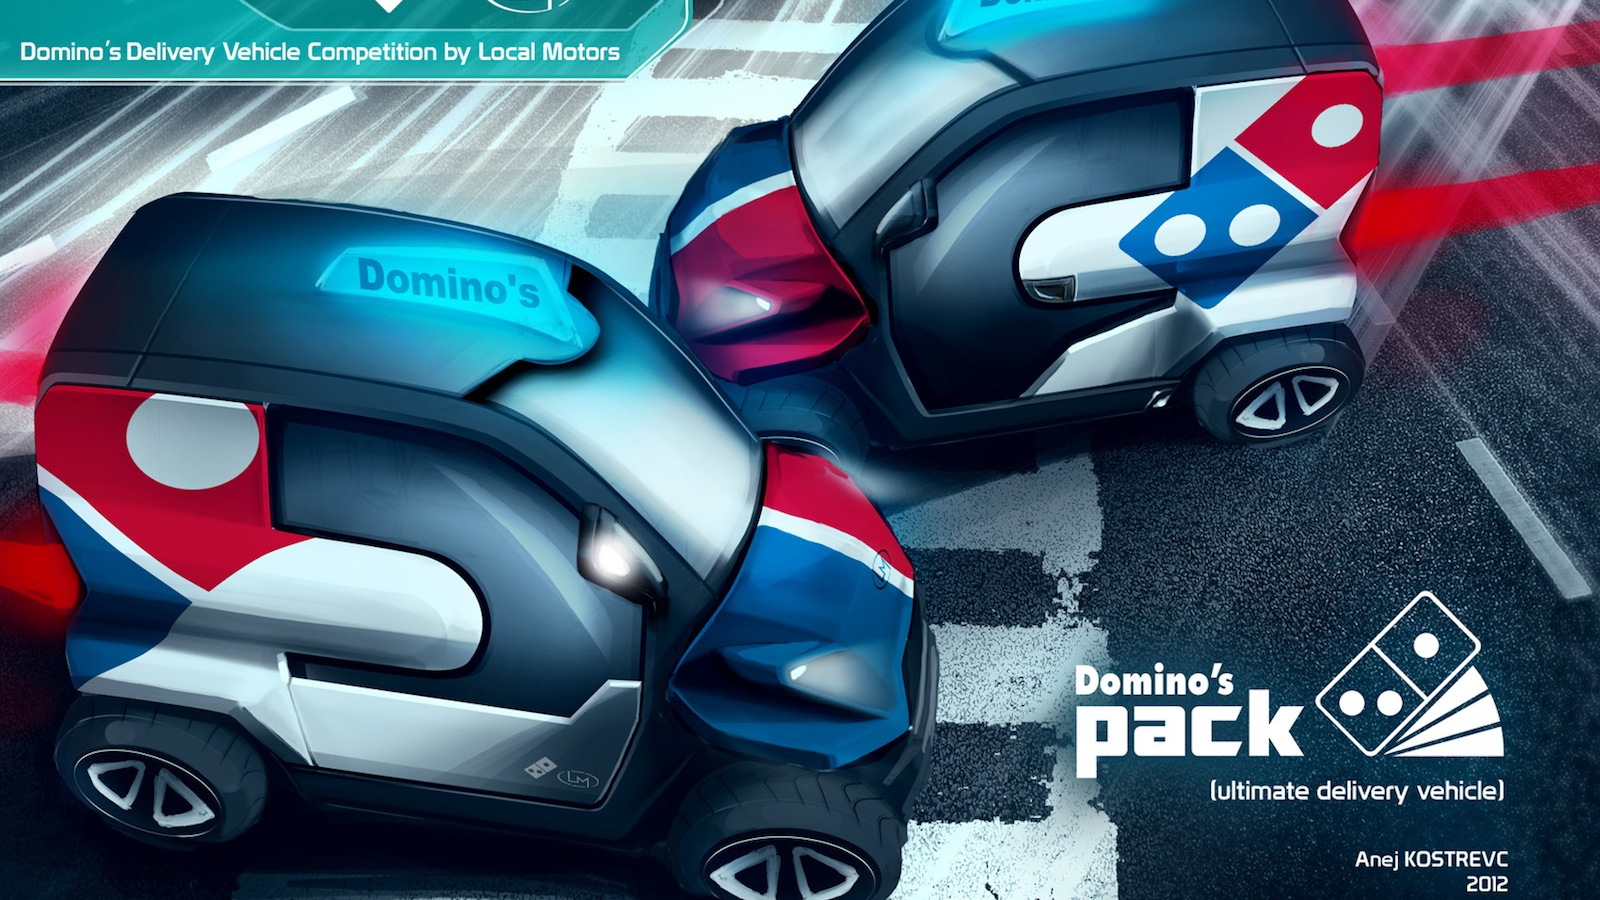 Anej Kostrevic's winning design entry, the Domino's Pack